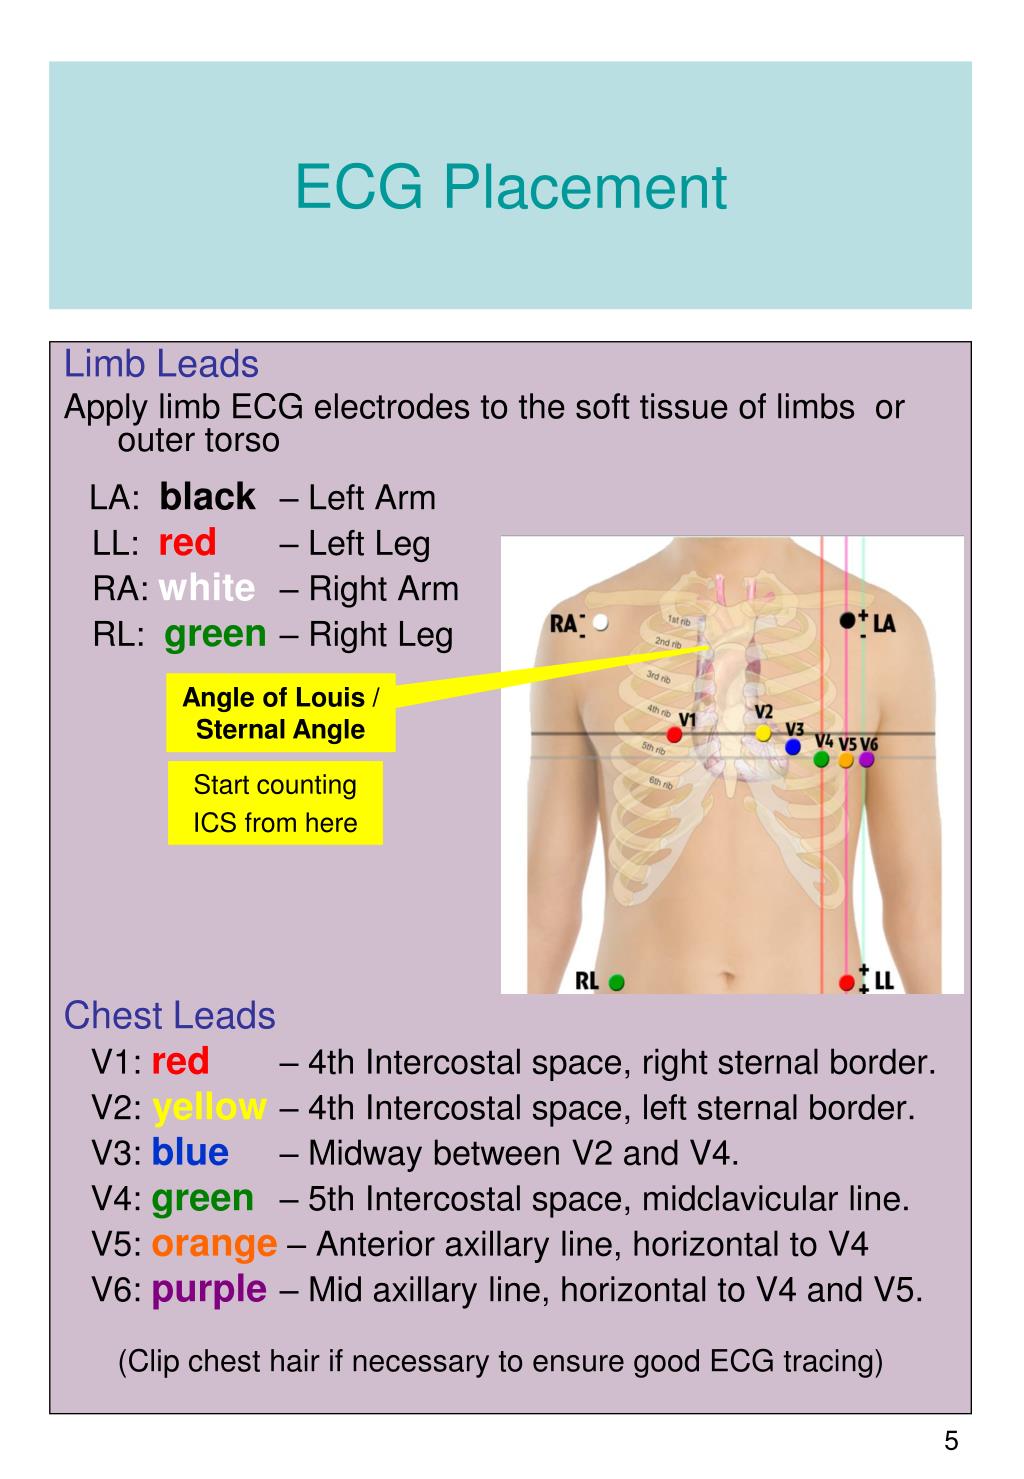 Ecg Placement Guide